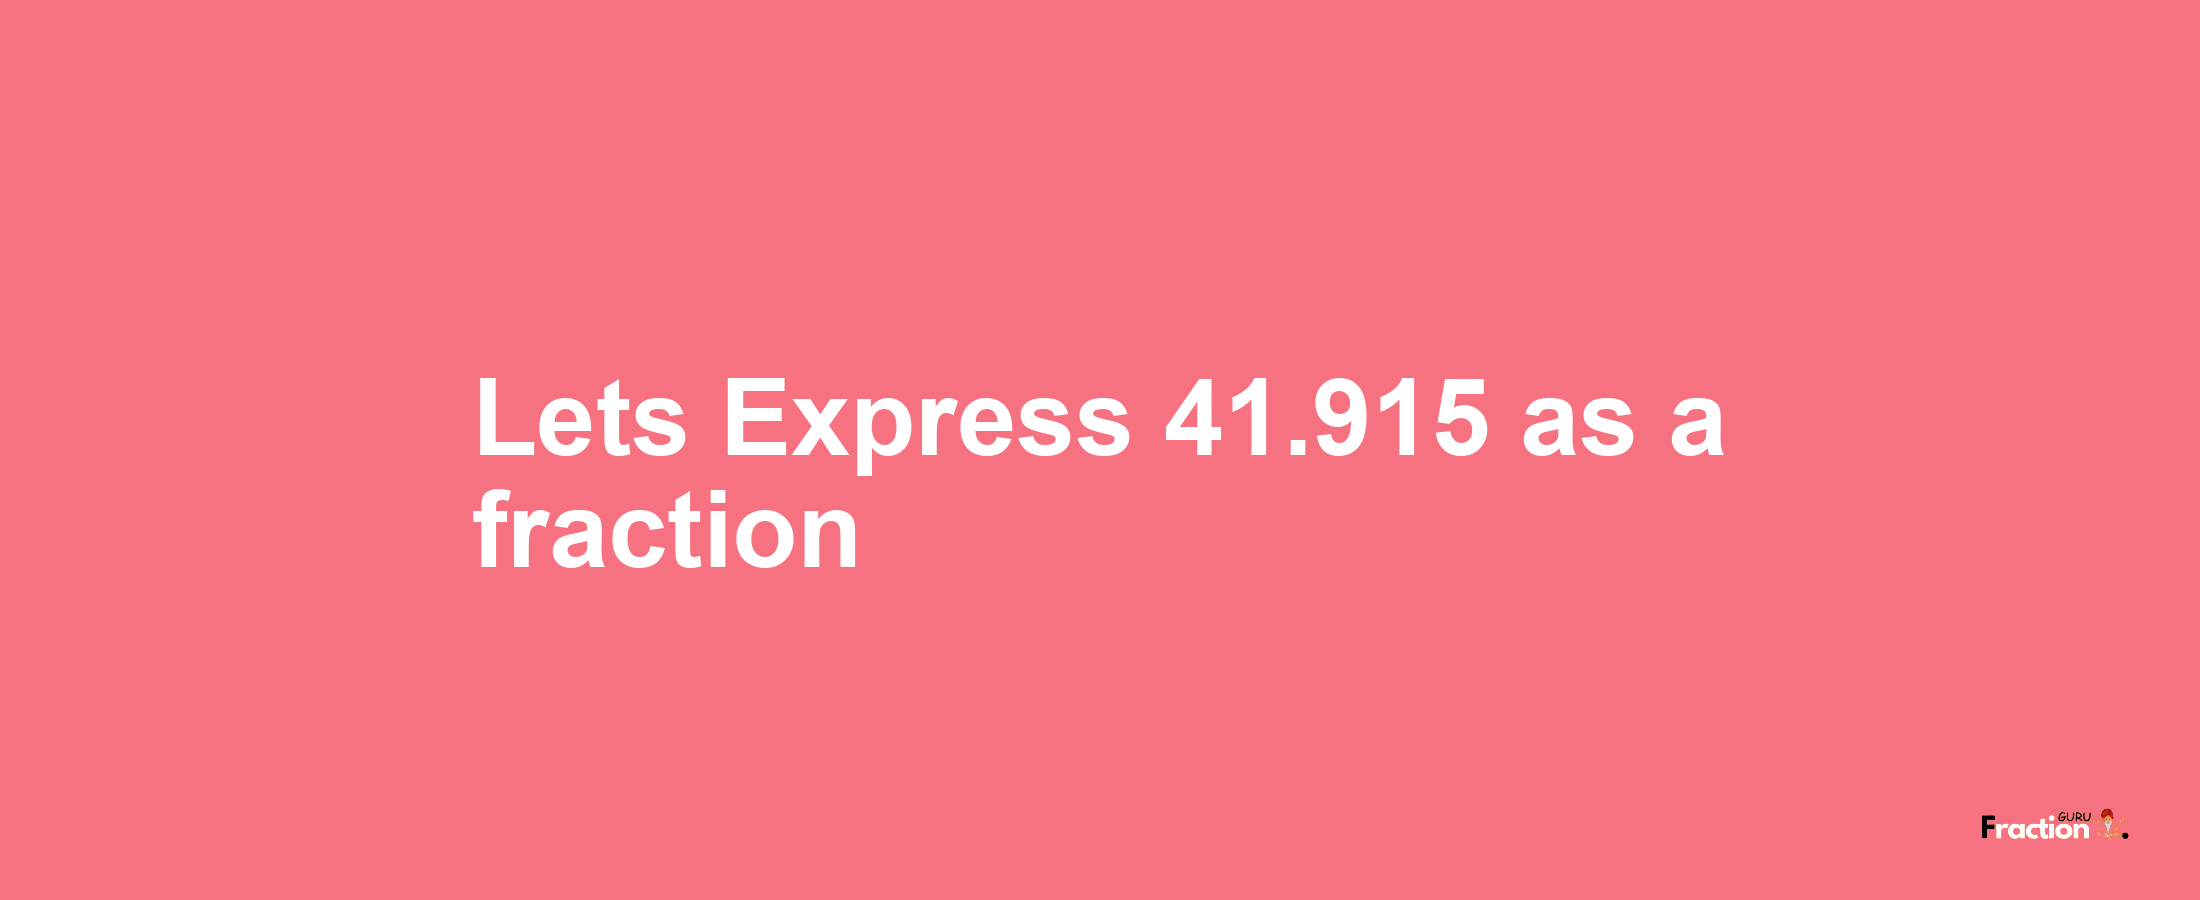 Lets Express 41.915 as afraction